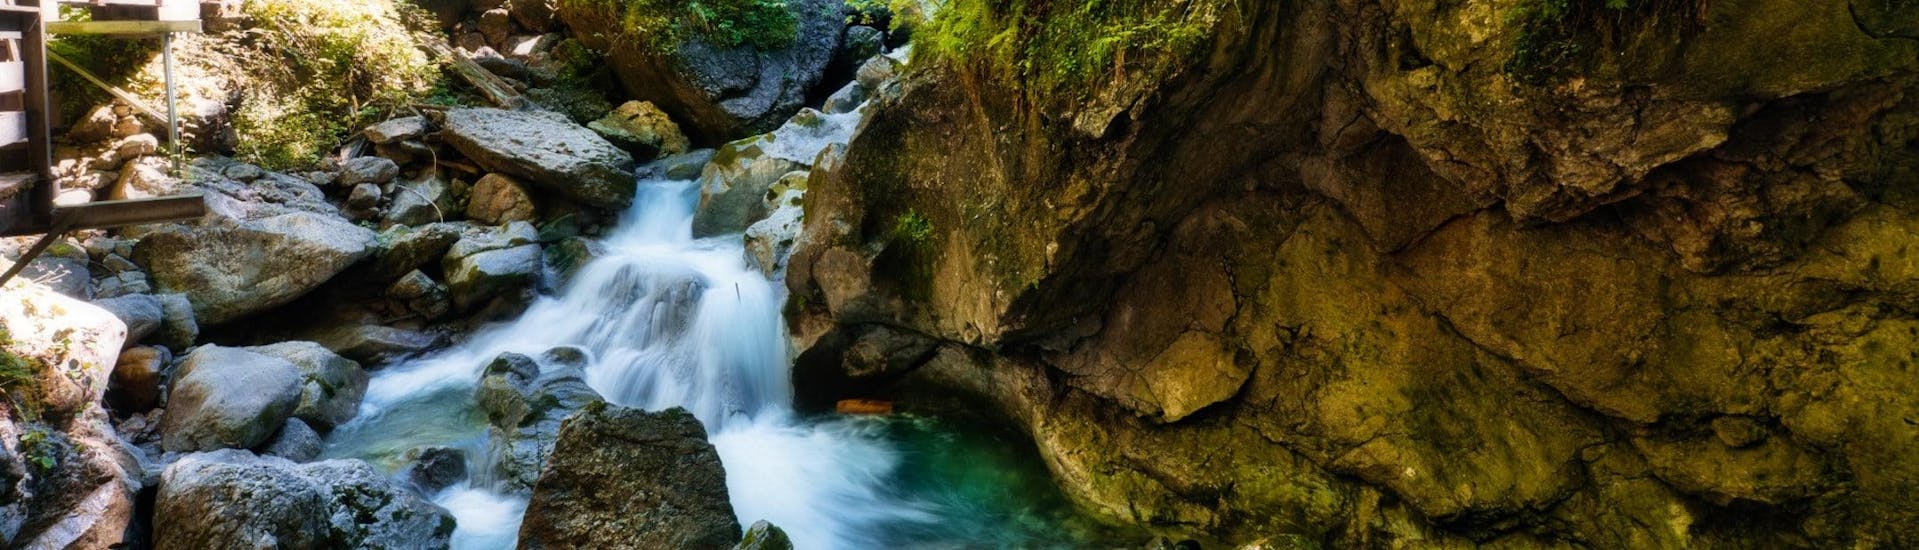 An image of the Seisenbergklamm, a popular destination to go canyoning in Salzburg.